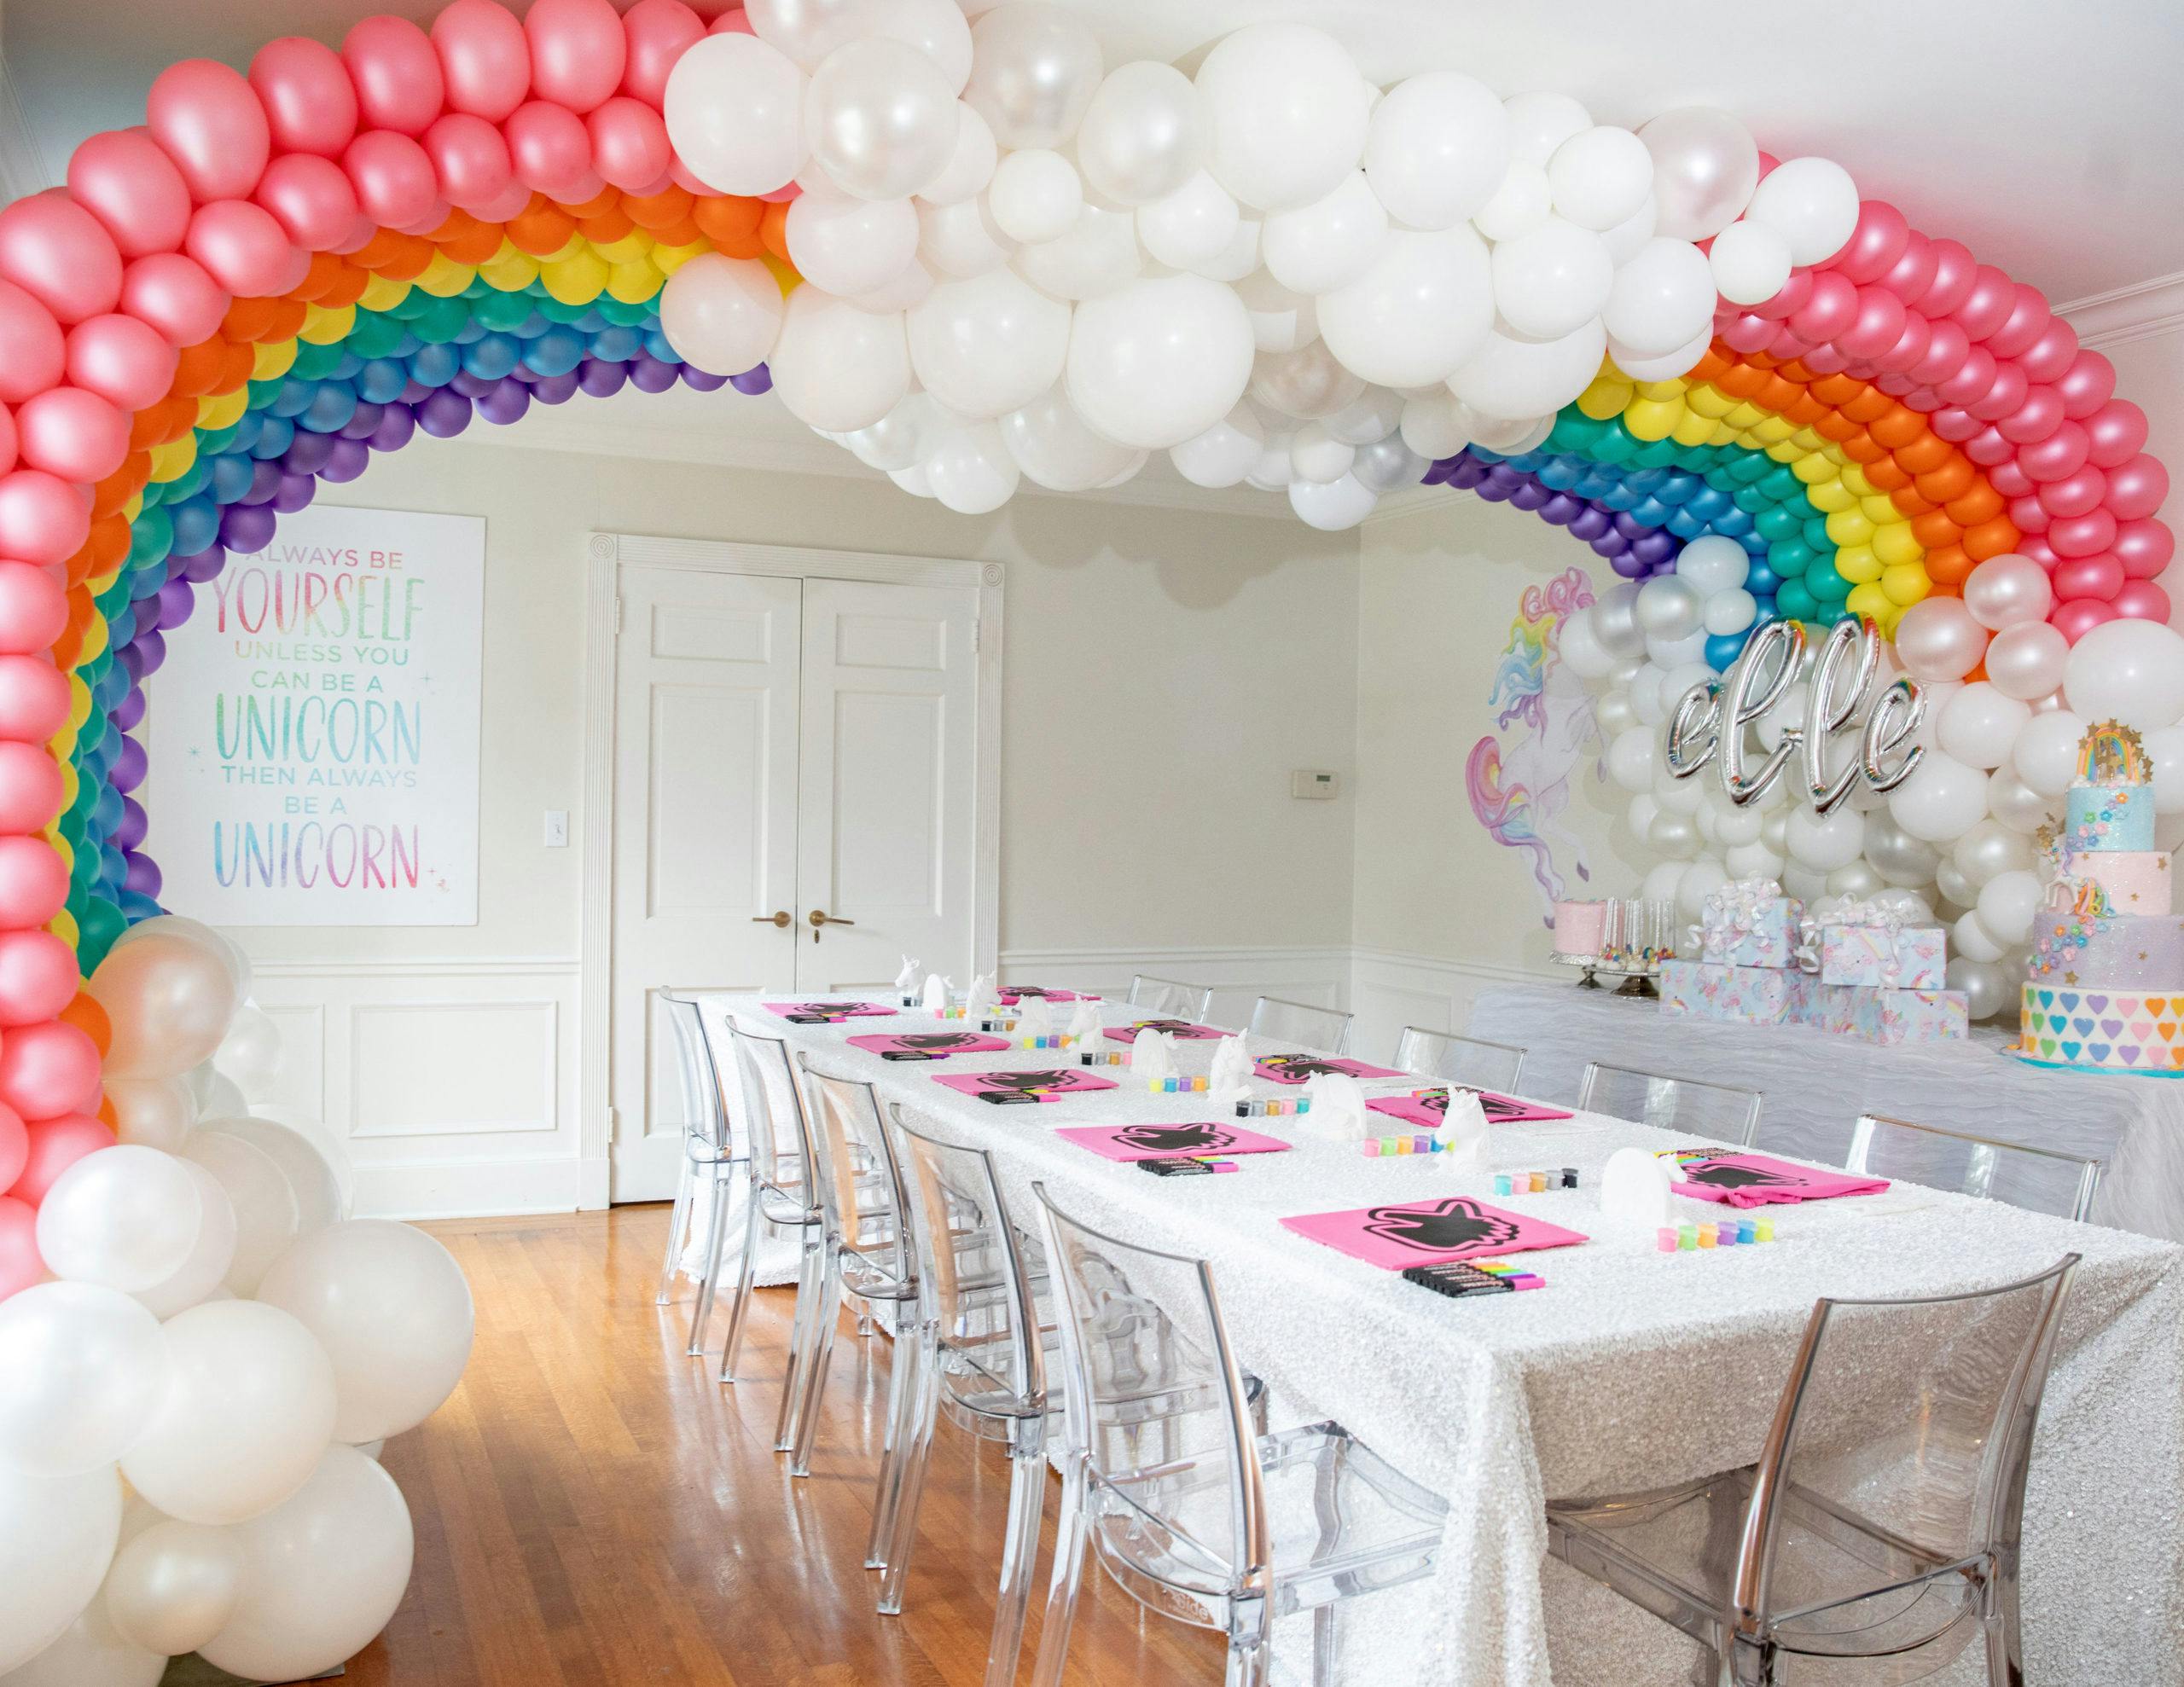 Chic Unicorn and Rainbow Themed Kids Birthday Party in New York City with Colorful Balloon Installations and Arches | PartySlate